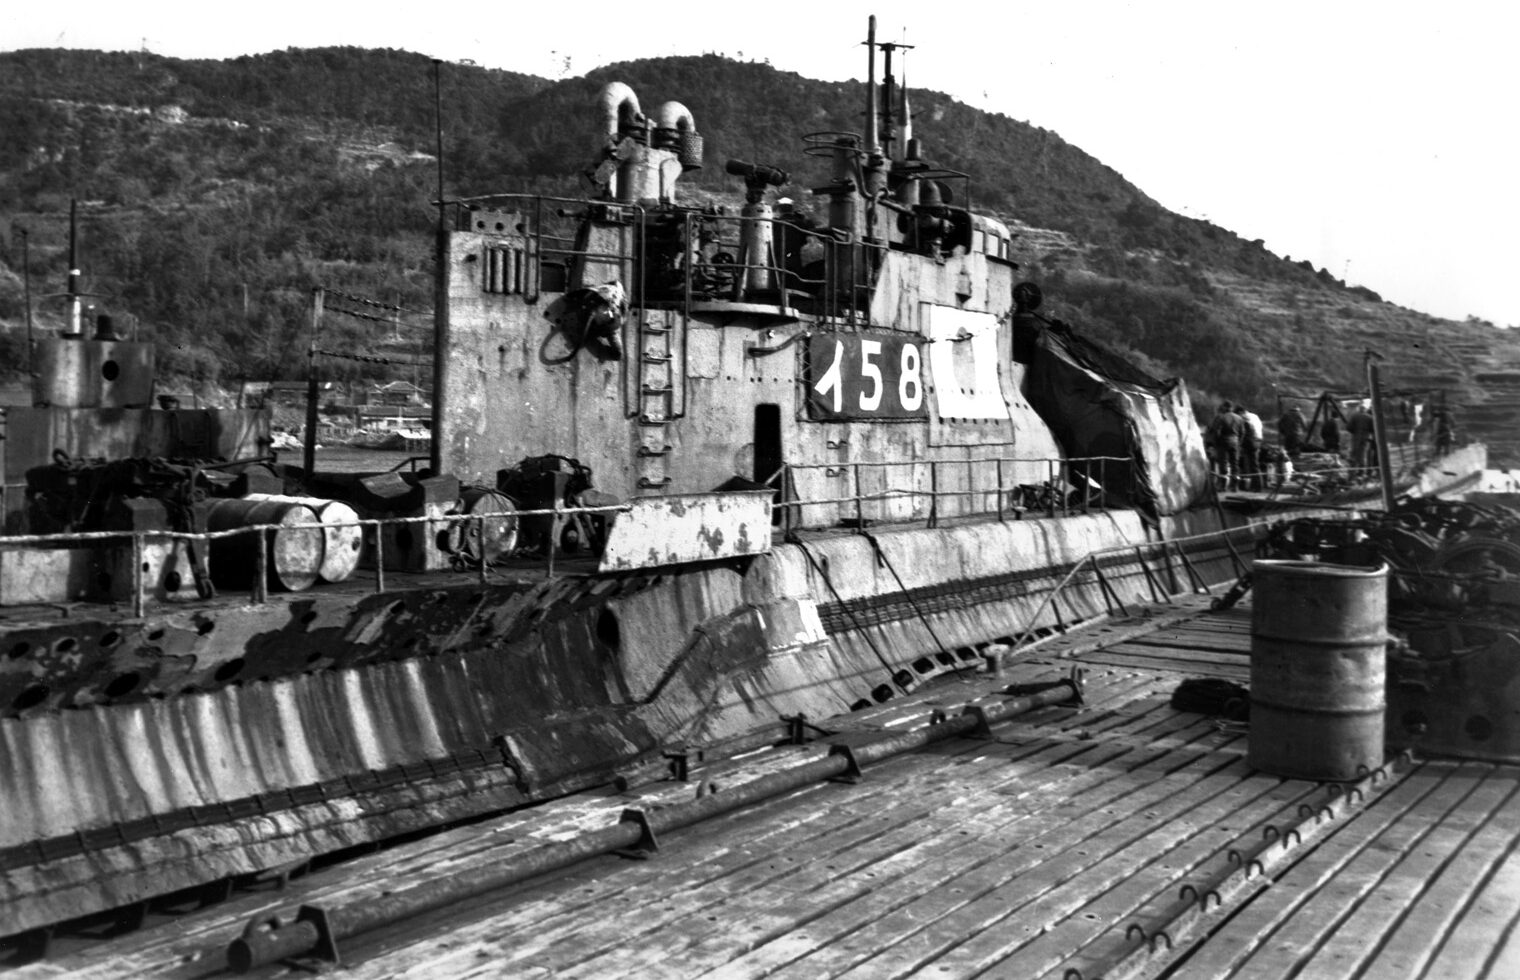 The Japanese submarine I-58, the killer of the Indy, photographed in her berth at Sasebo.